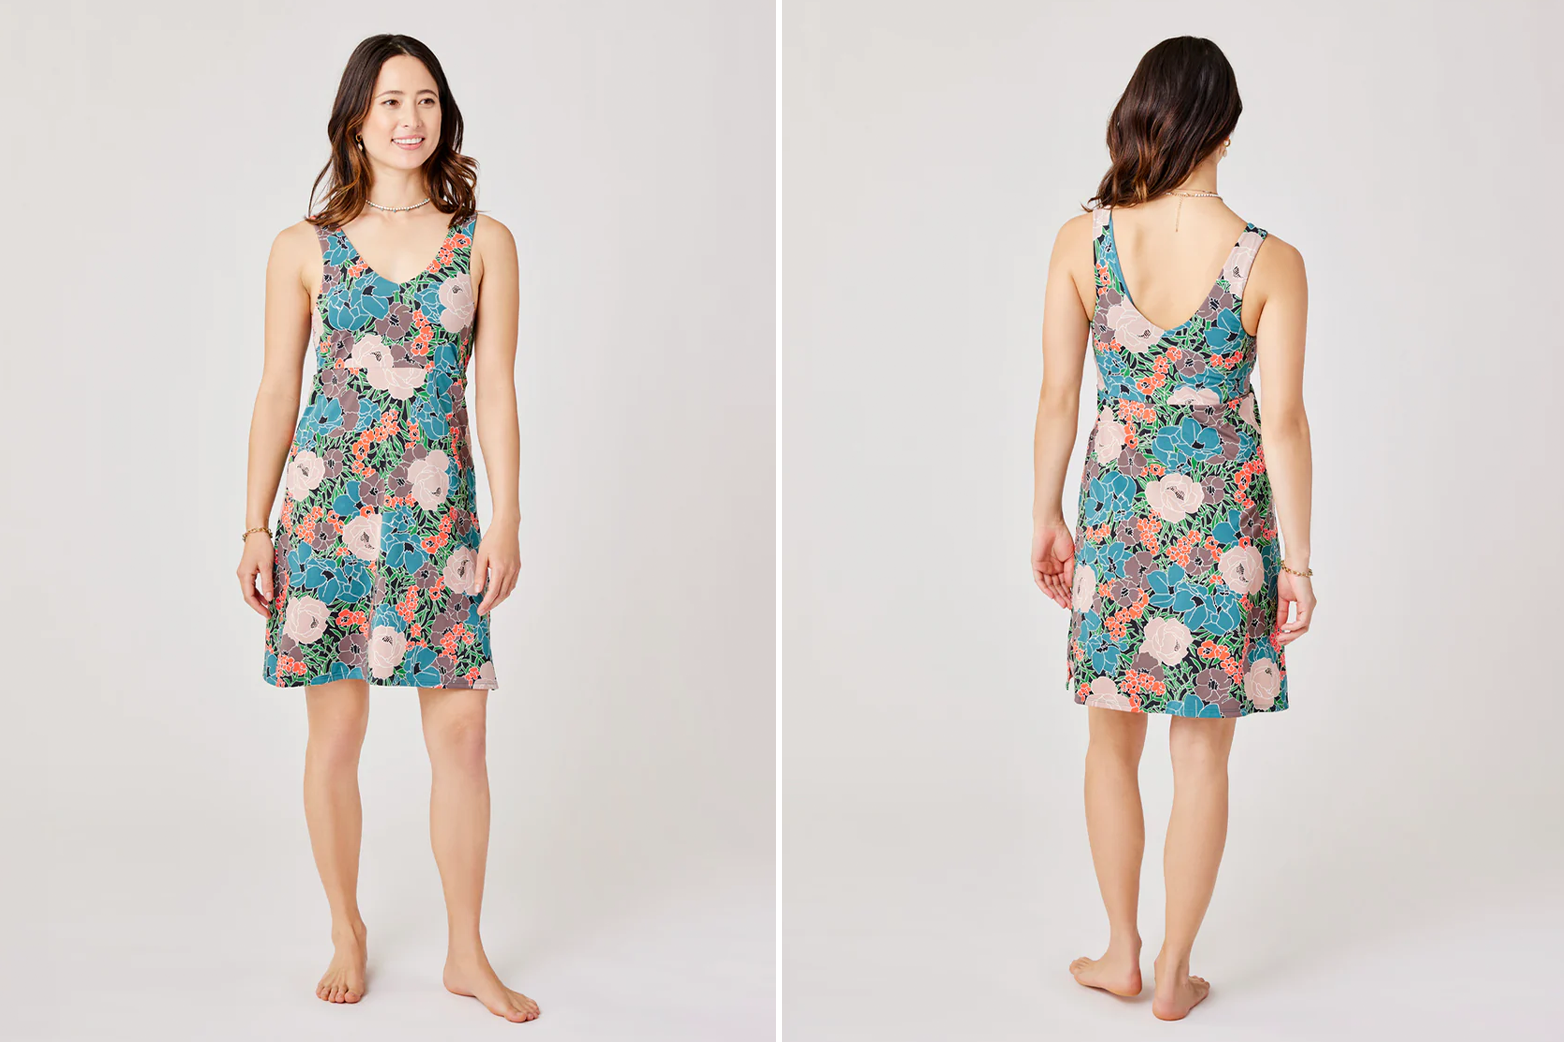 Female modeling a multi colored floral dress front and back